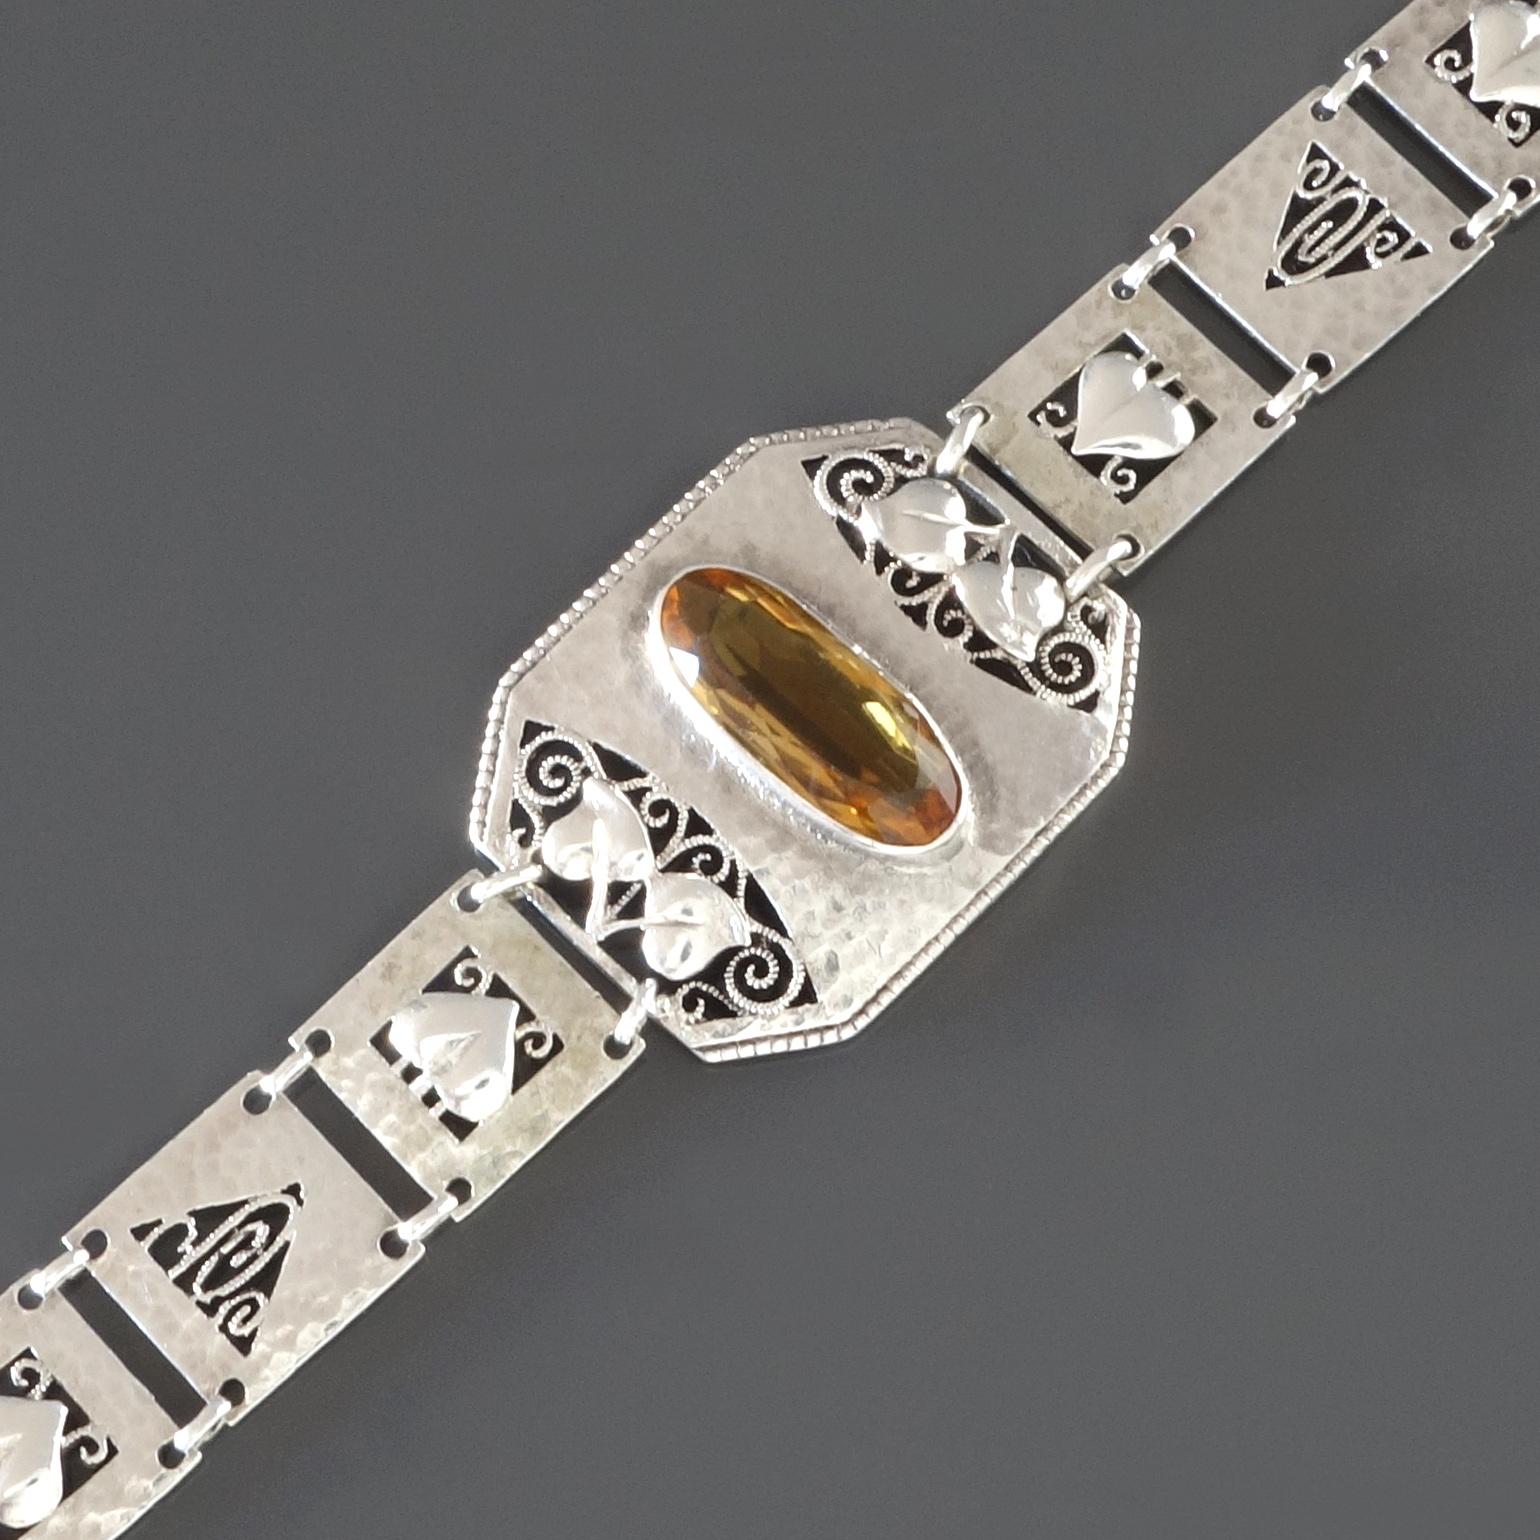 Theodor Fahrner Art Nouveau Citrine Silver Bracelet
Silver 935, citrine
L (when closed) 17.3 cm (approx. 6 13/16”), W 1.15 cm to 2.35 cm (approx. 7/16” to 15/16”)
Marks: silver content mark ‘935’, ligated ‘TF’ in a circle, ‘DEPOSE’
Germany, ca.